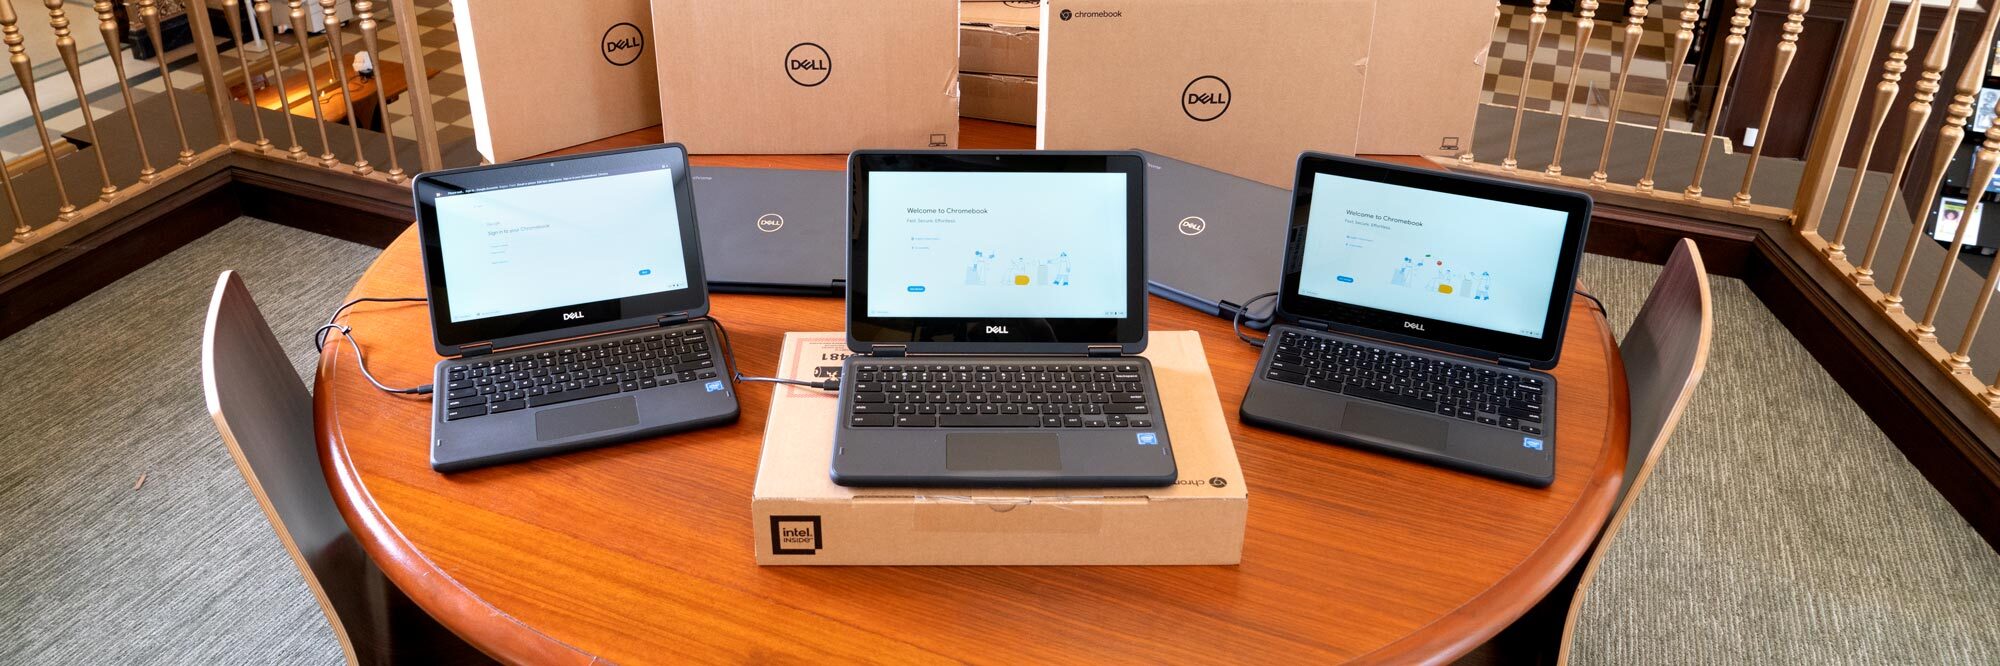 Dell Chromebooks - 3 open laptops on a round table